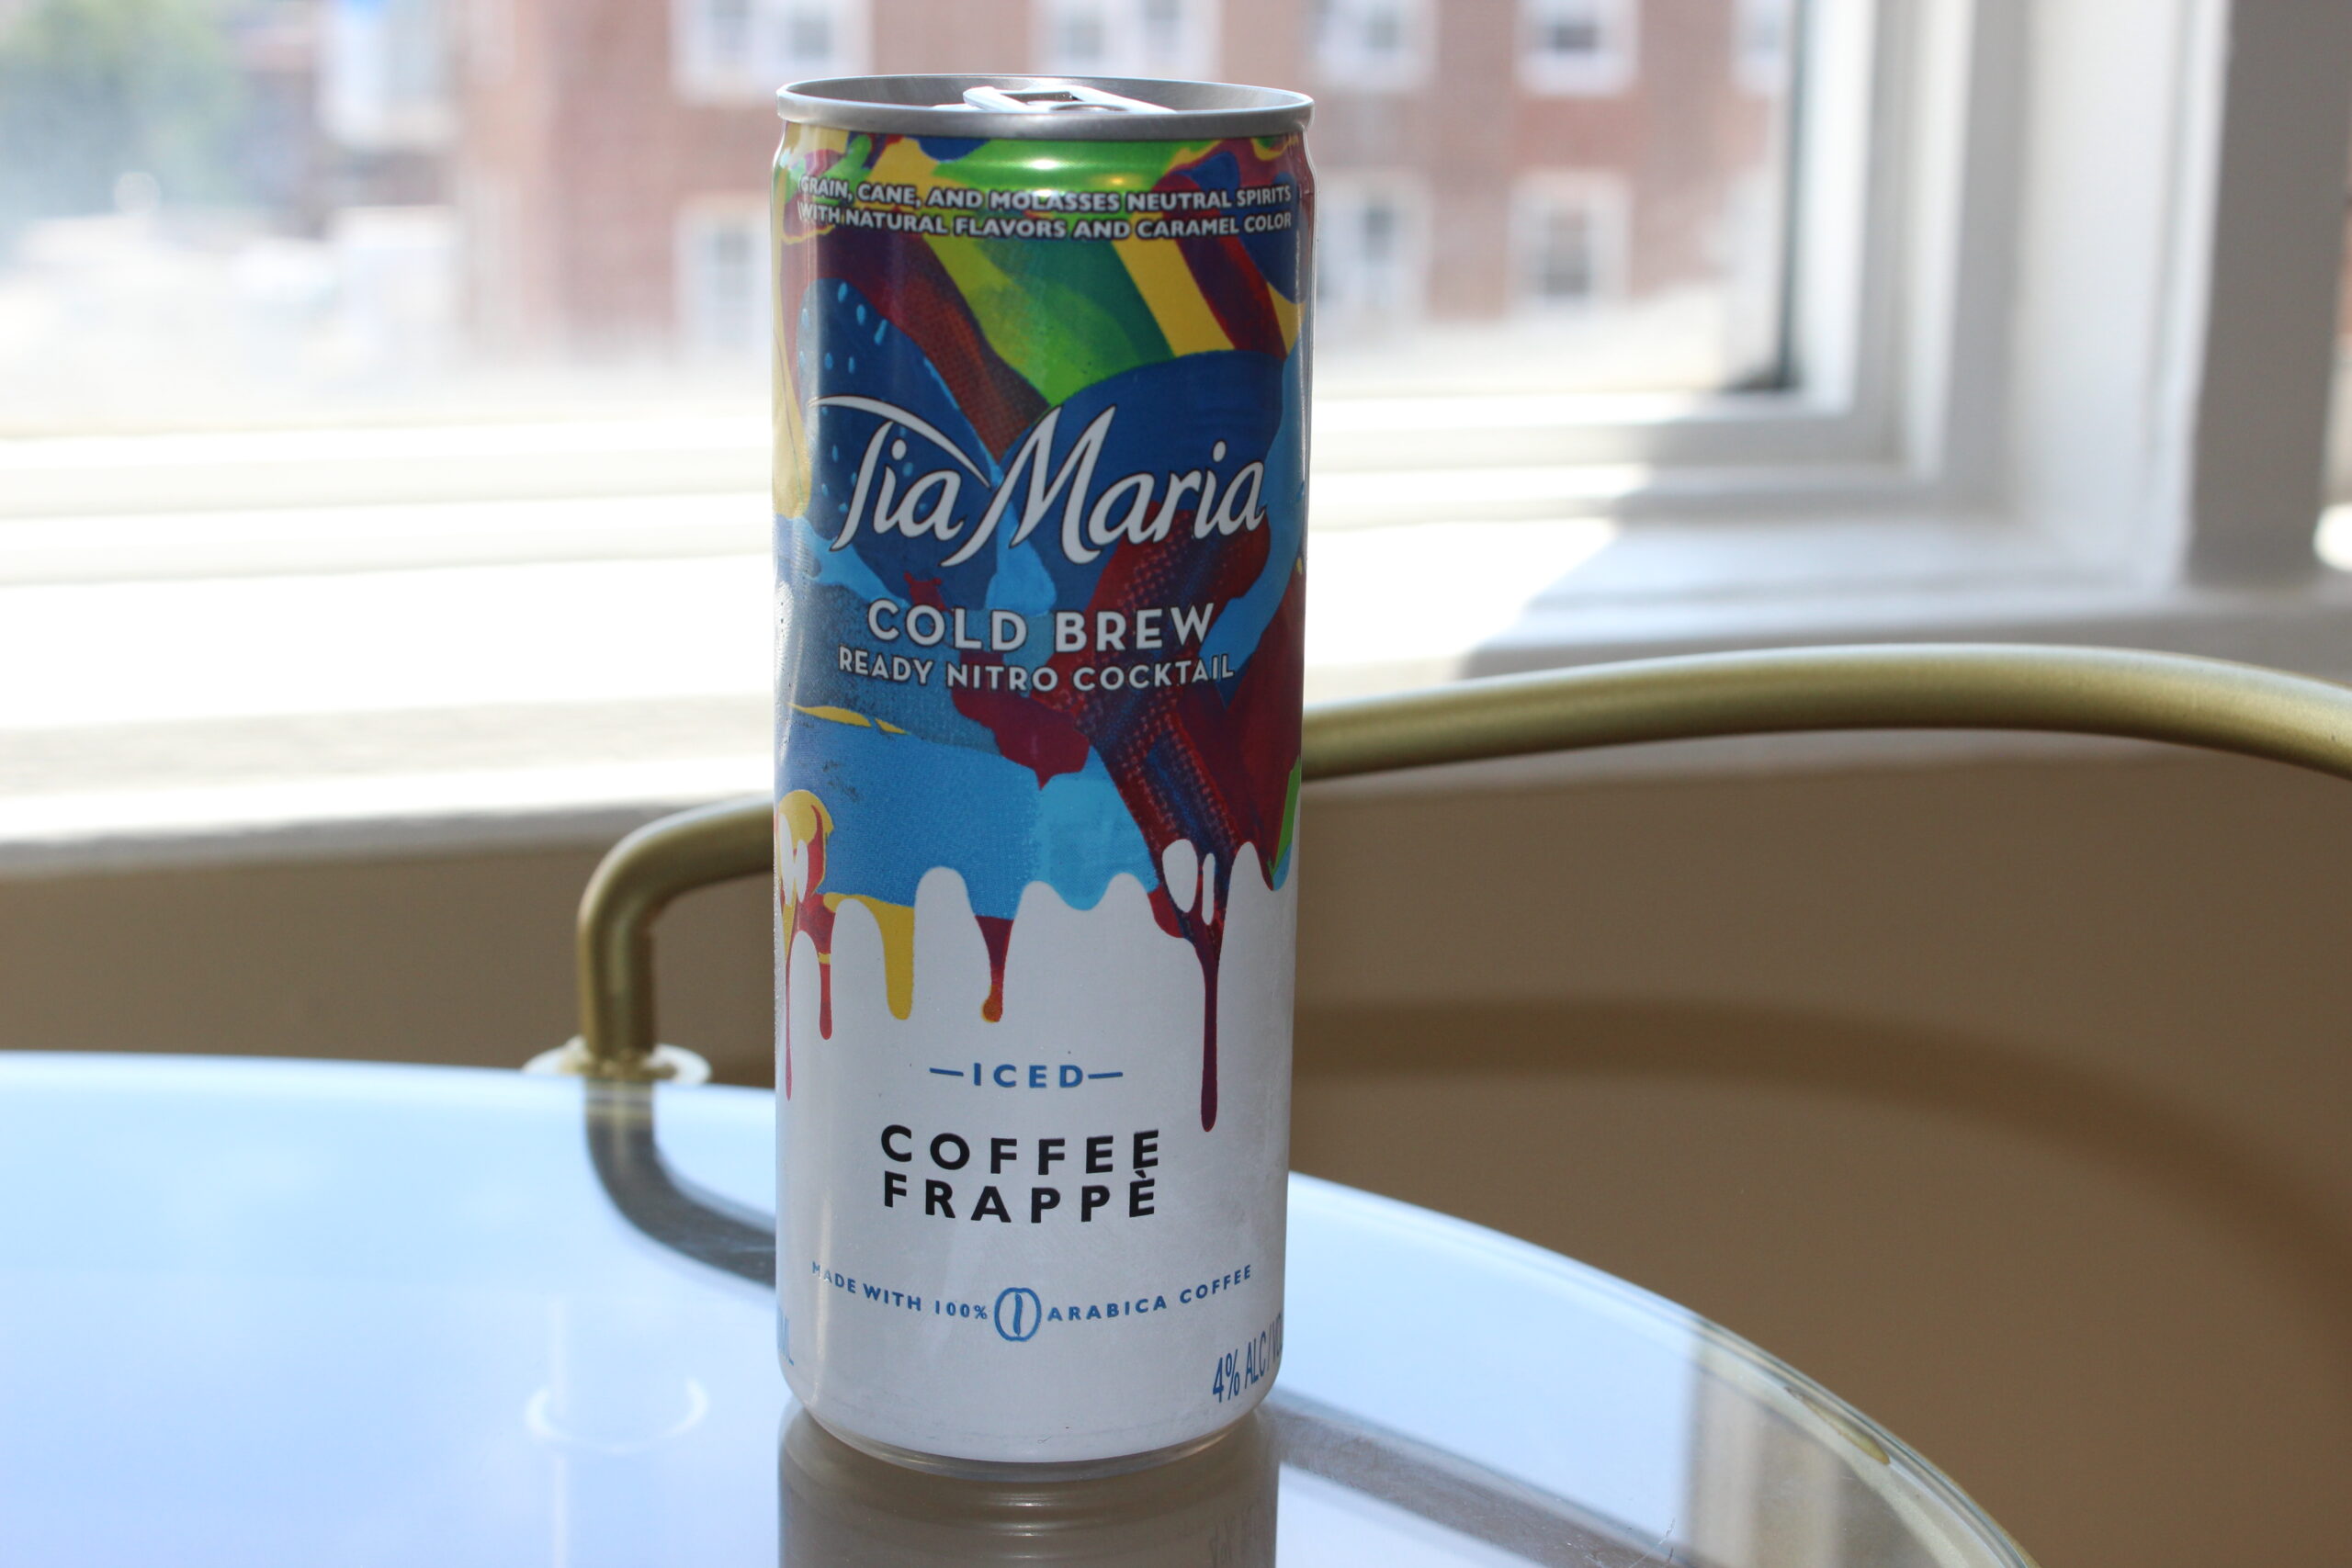 Tia Maria’s New RTD is Changing the Iced Coffee Game Just in Time for Summer